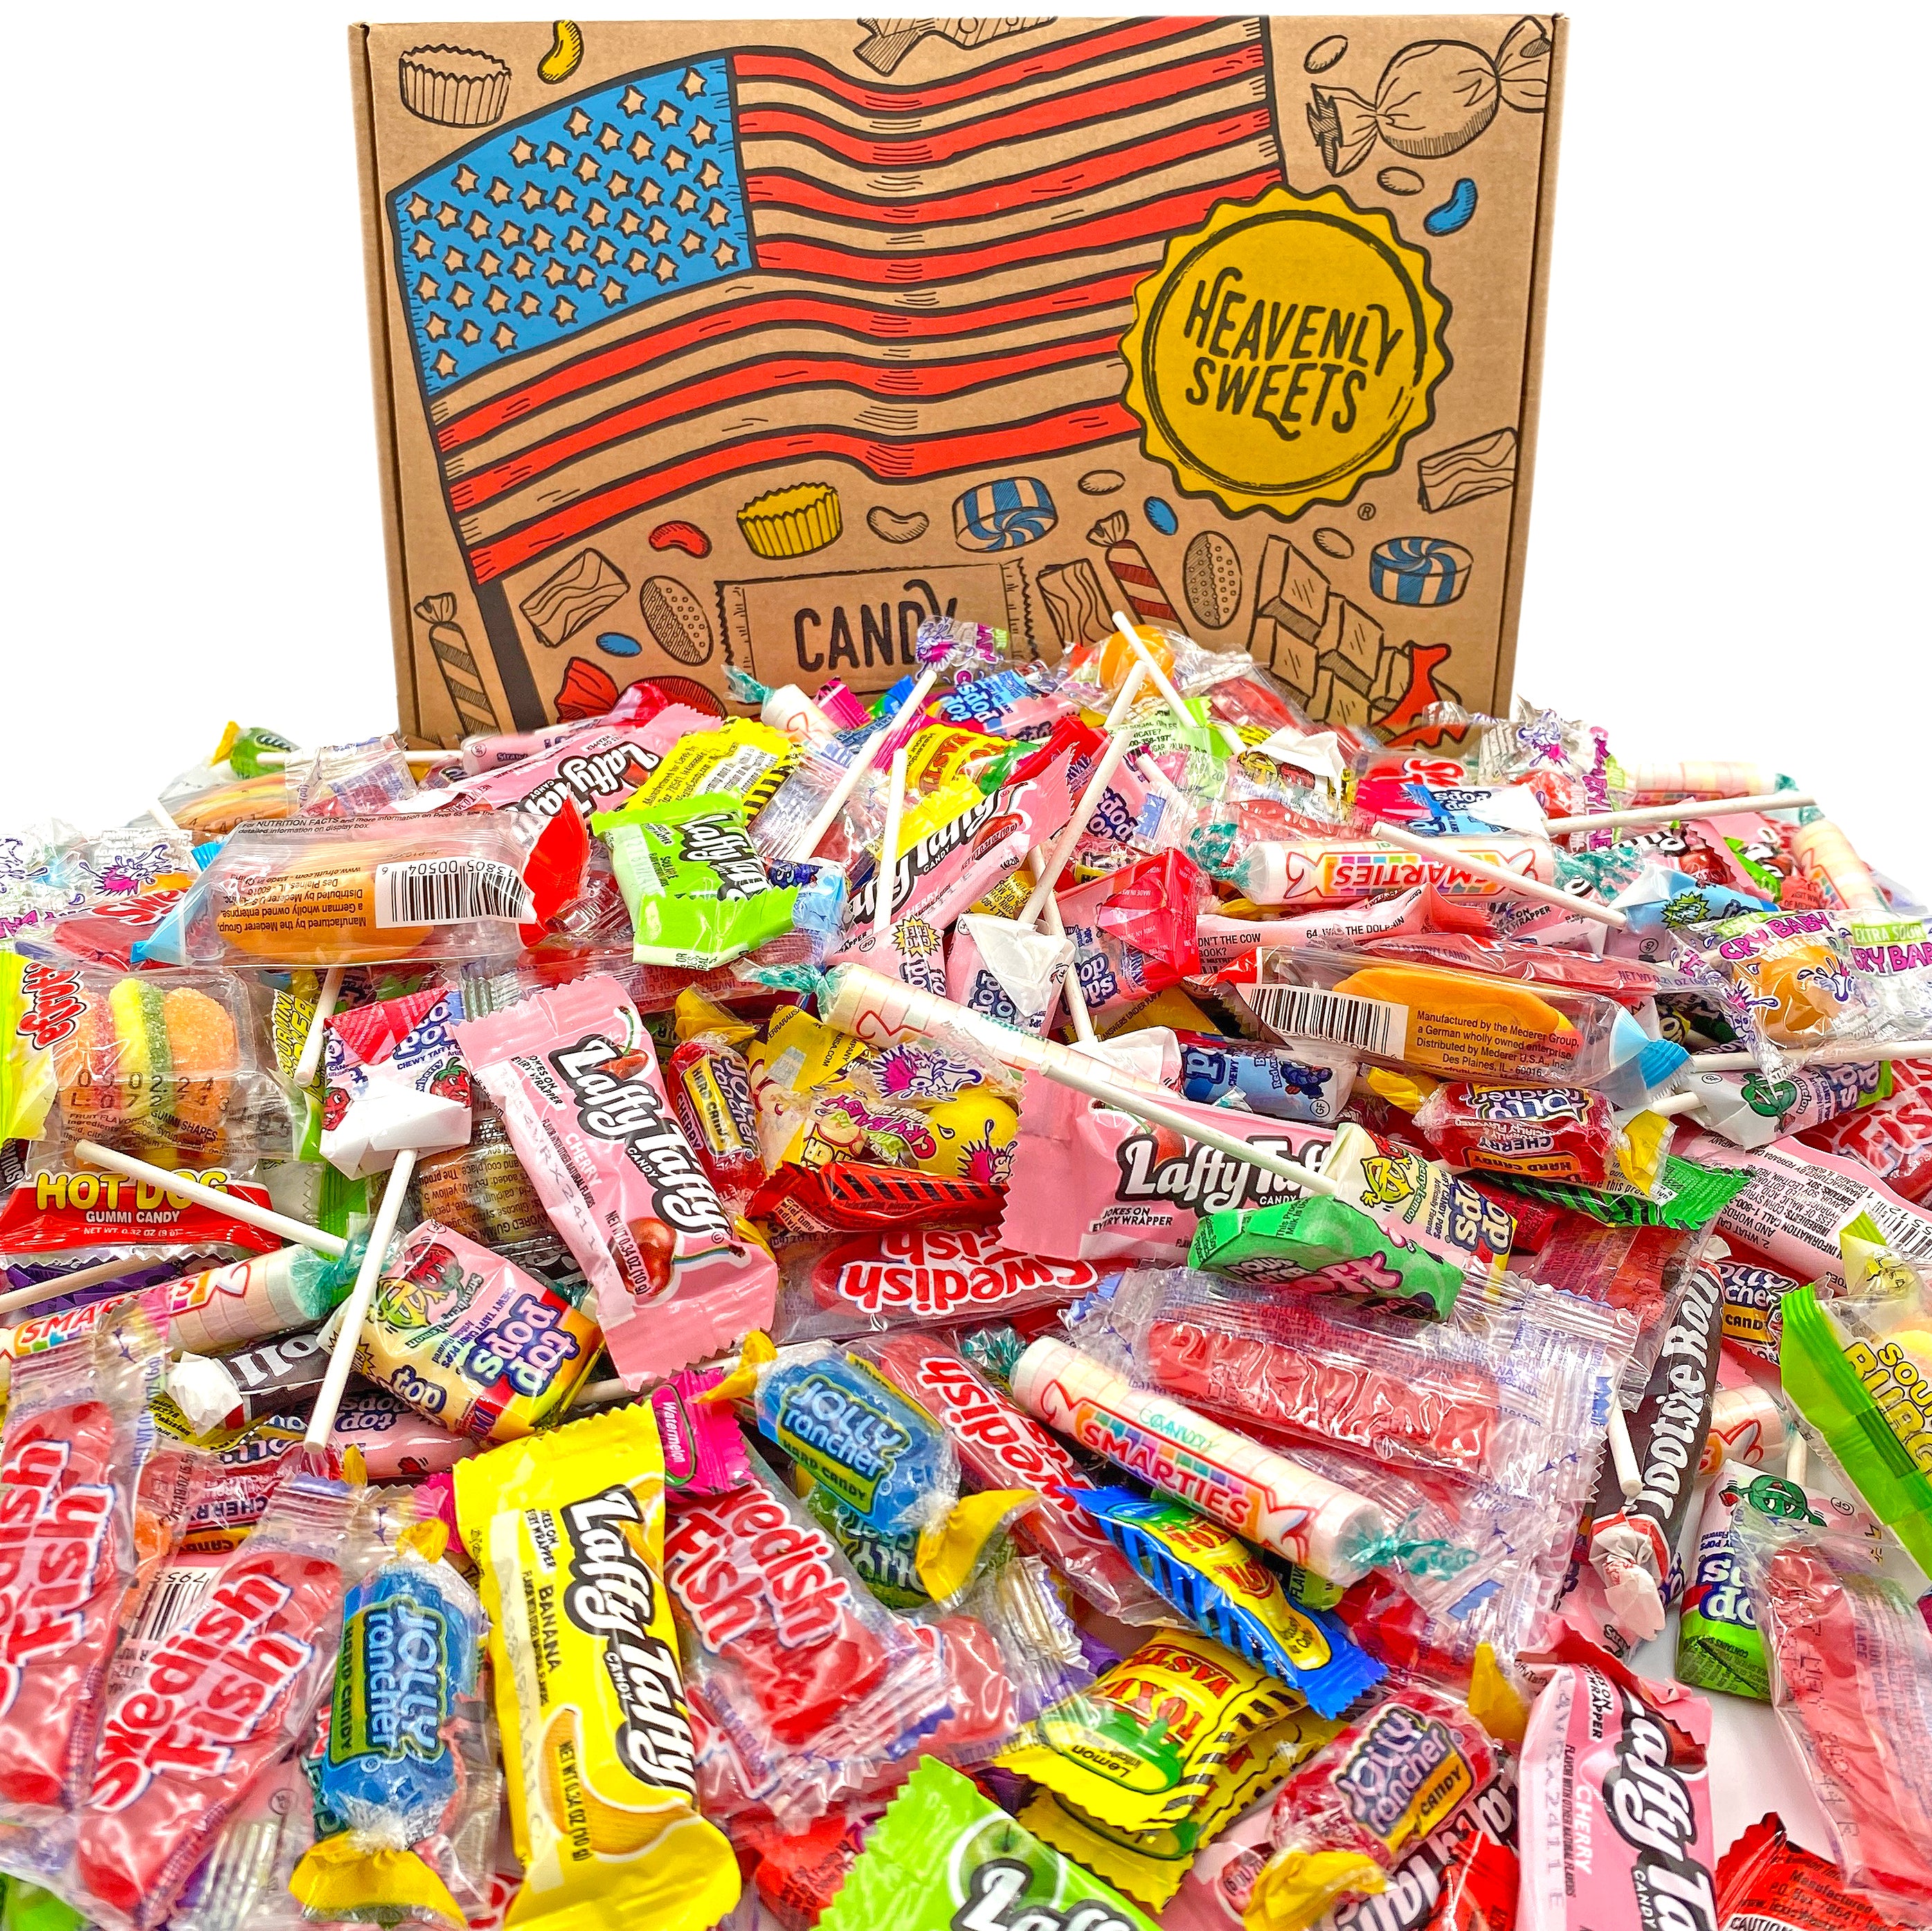 American Candy Sweets Party Gifts Box +100 pieces Hamper! Fathers Day & Birthday | Airheads, Laffy Taffy and more!